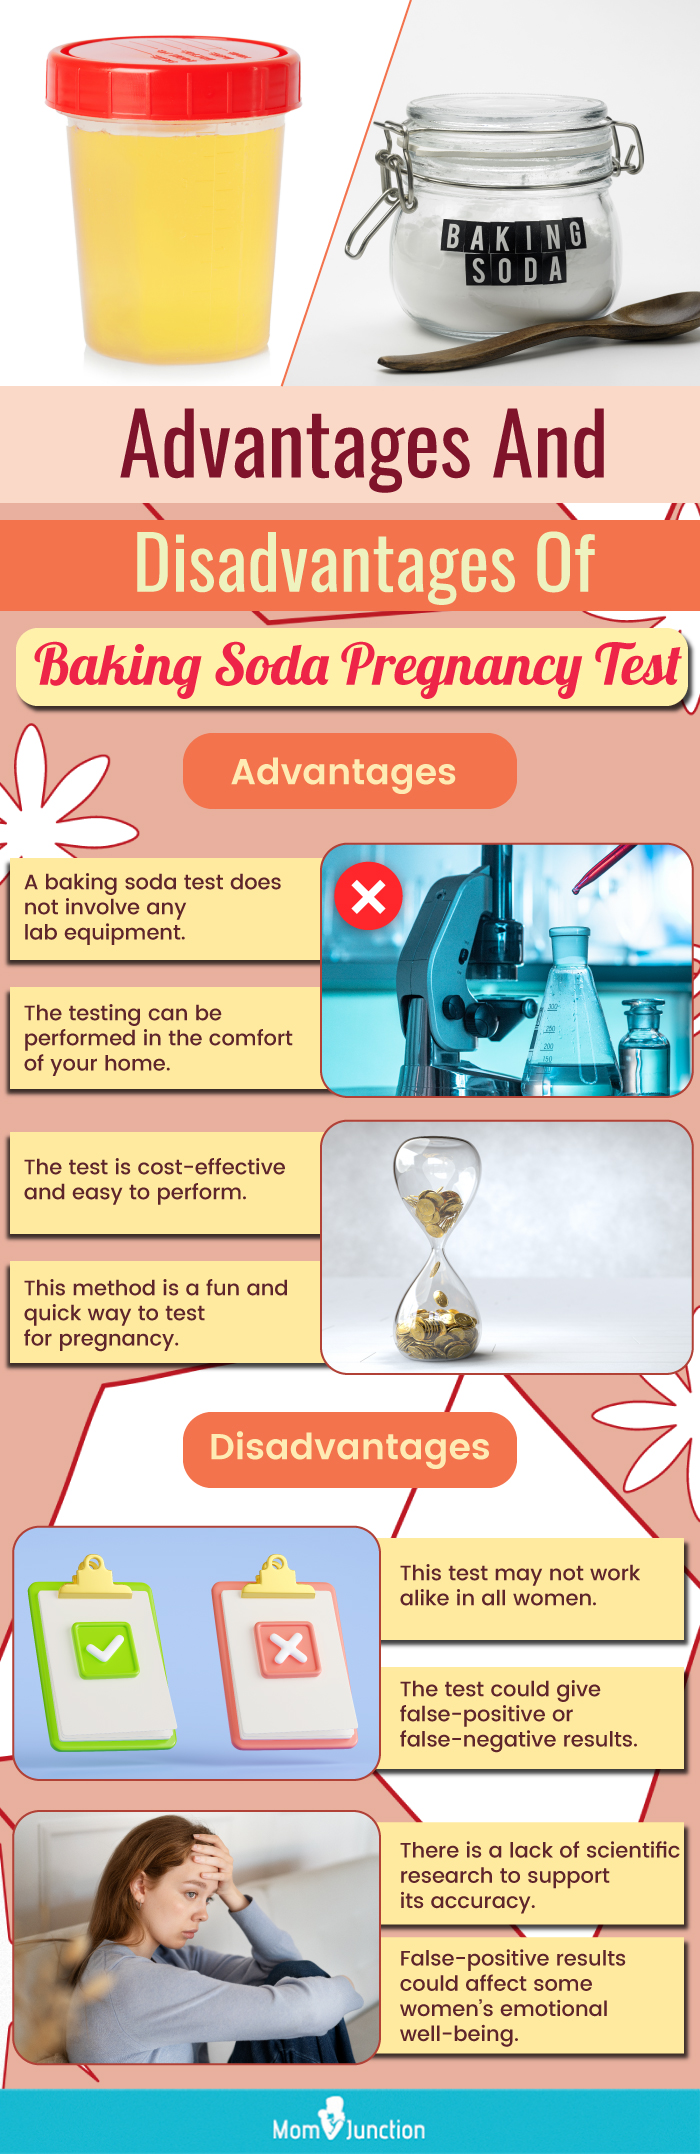 advantages and disadvantages of baking soda pregnancy test (infographic)